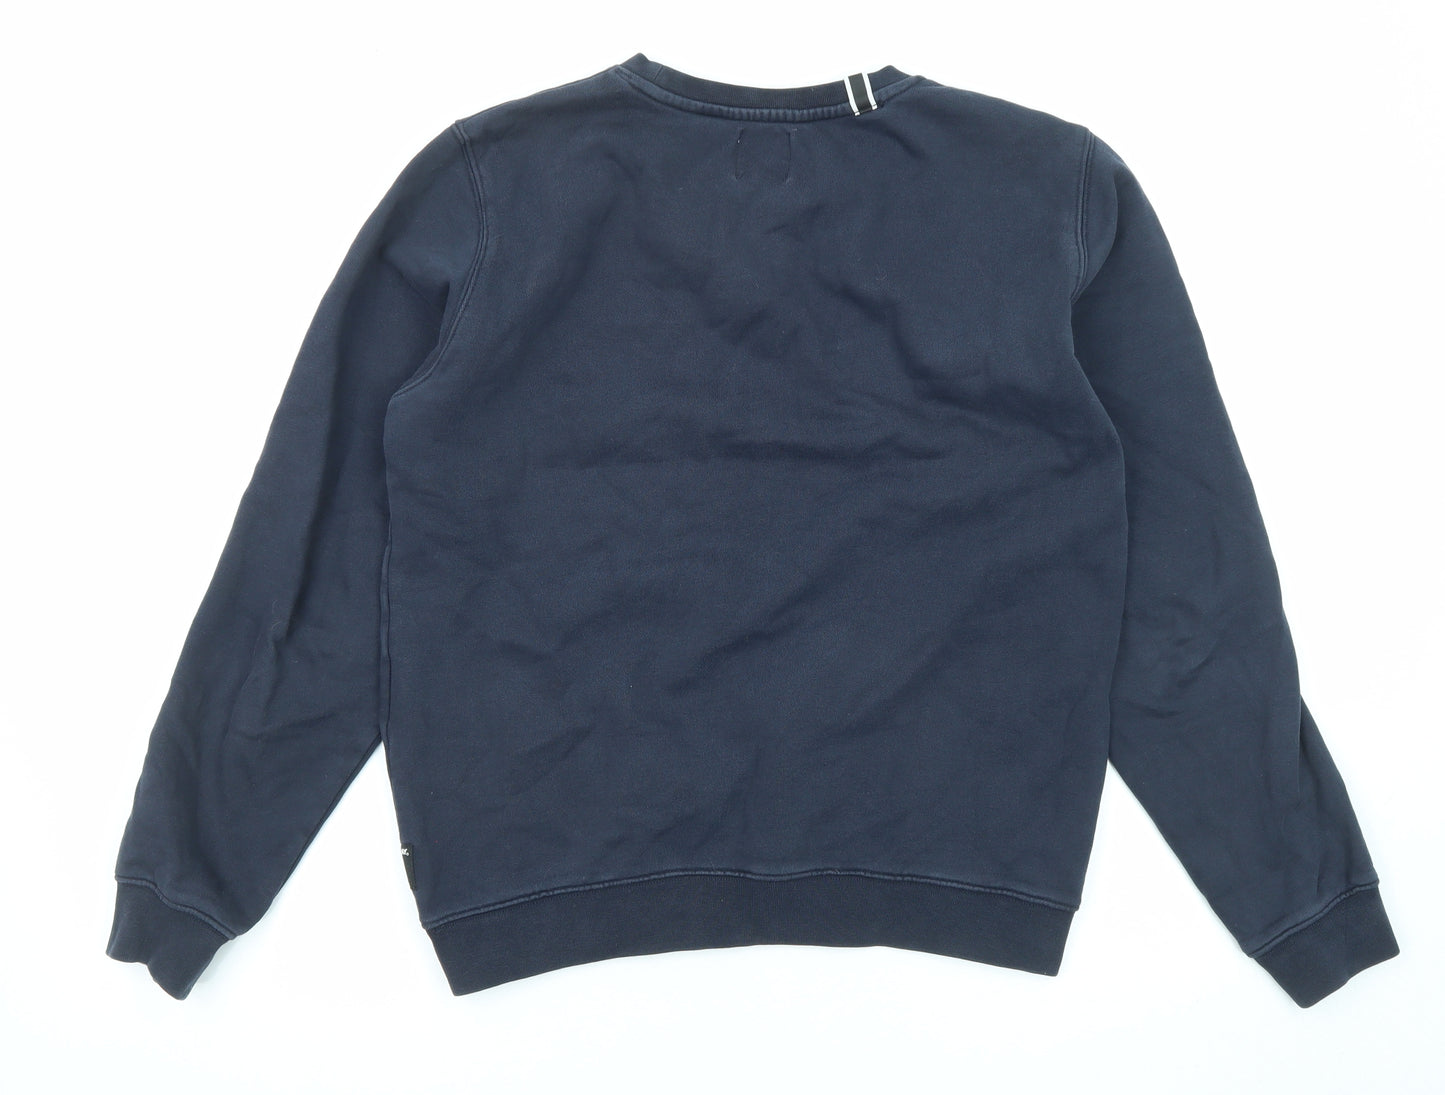 Replay Mens Blue Cotton Pullover Sweatshirt Size M